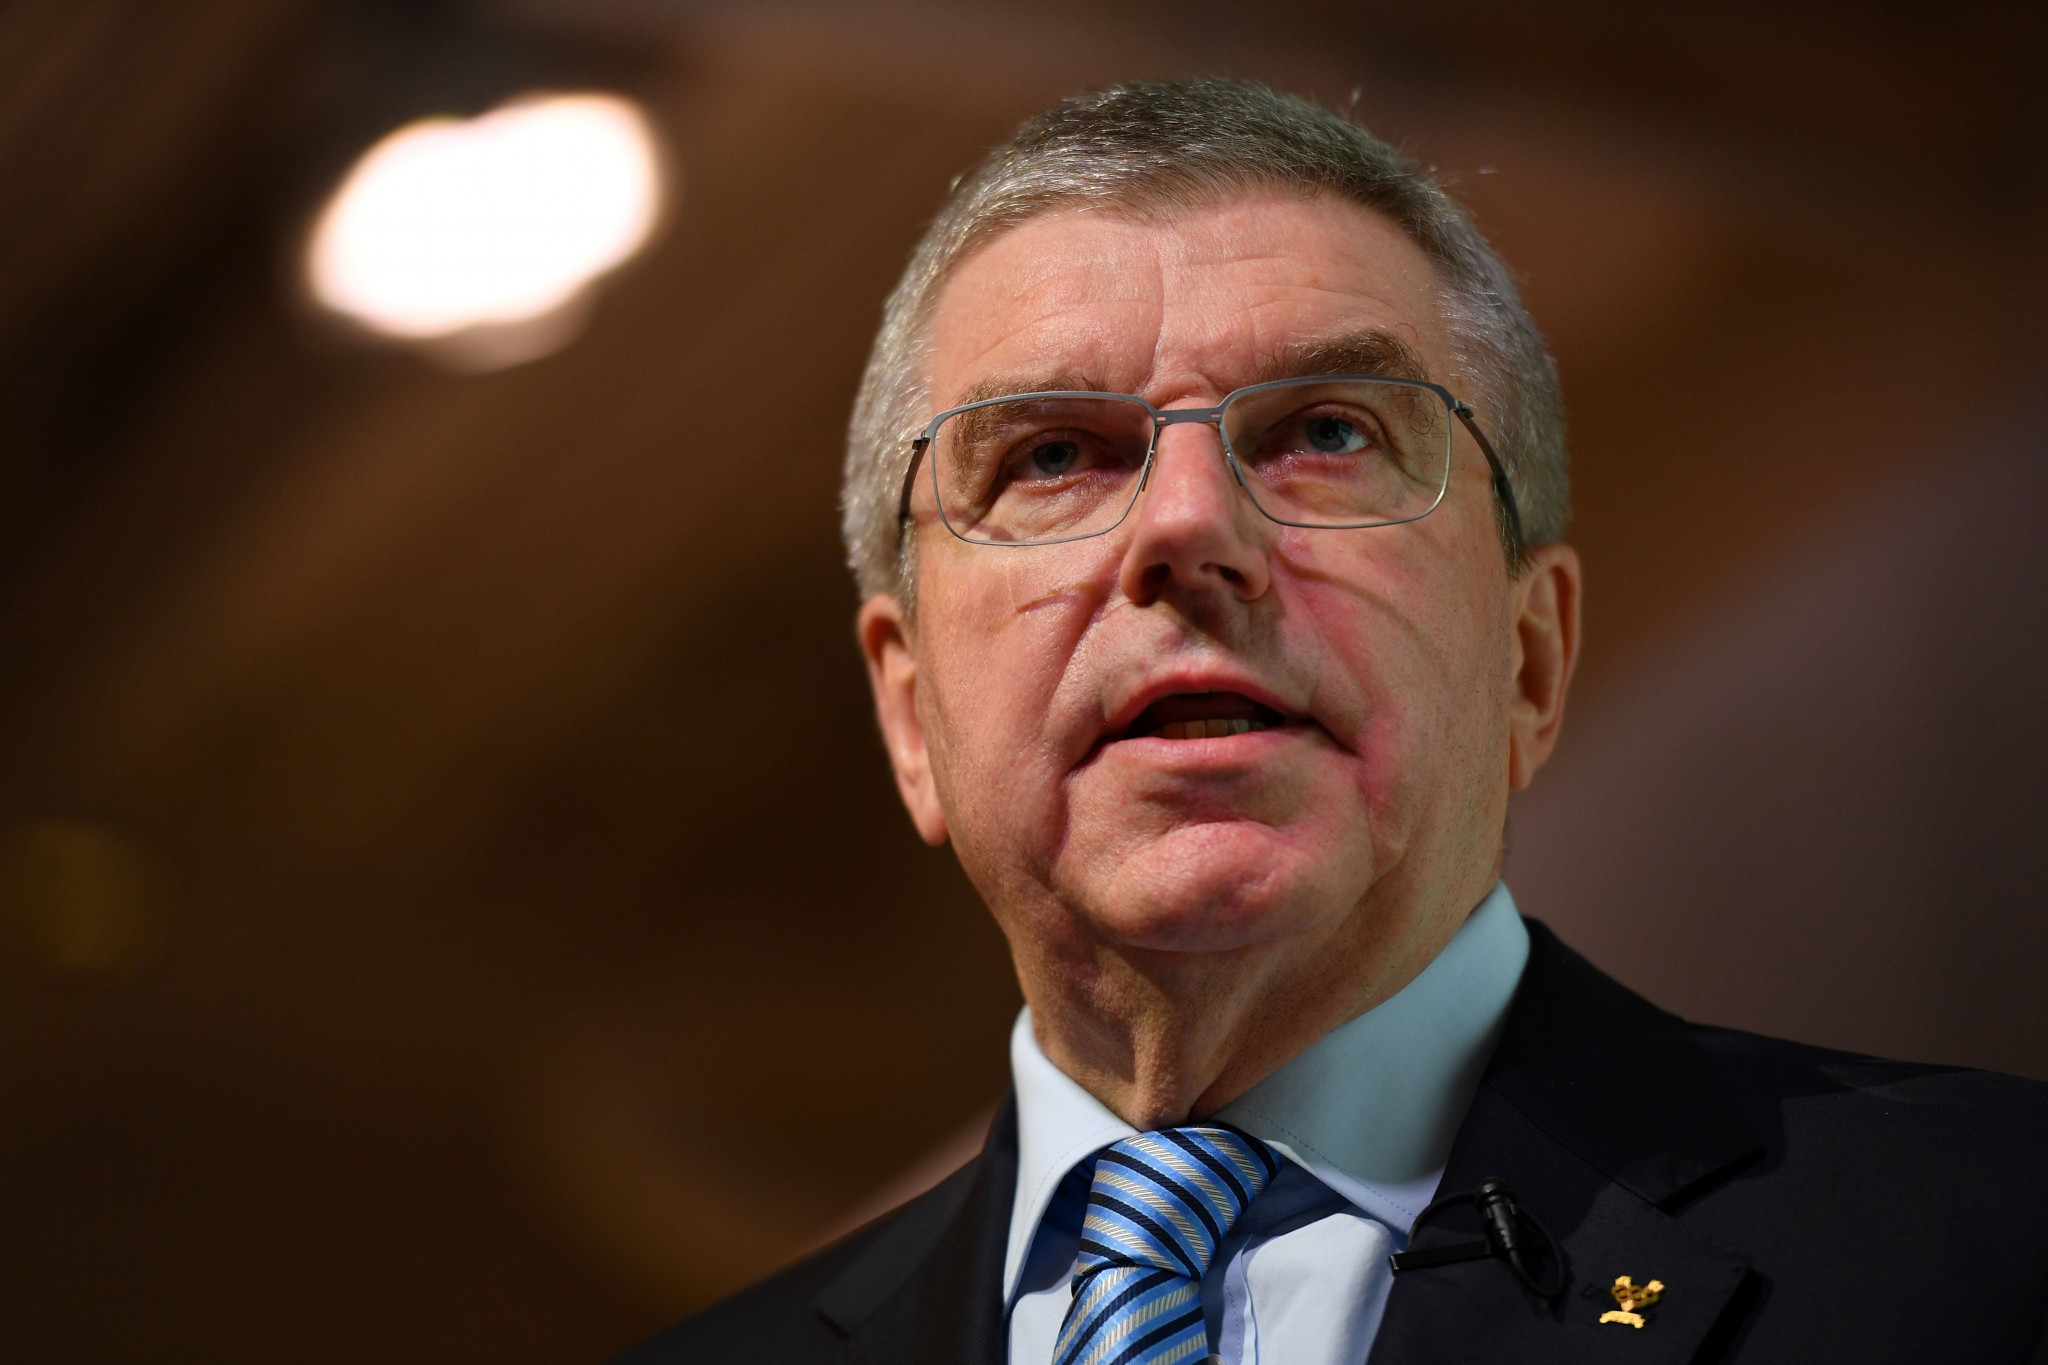 IOC President Thomas Bach will chair the Olympic Summit in Lausanne ©Getty Images